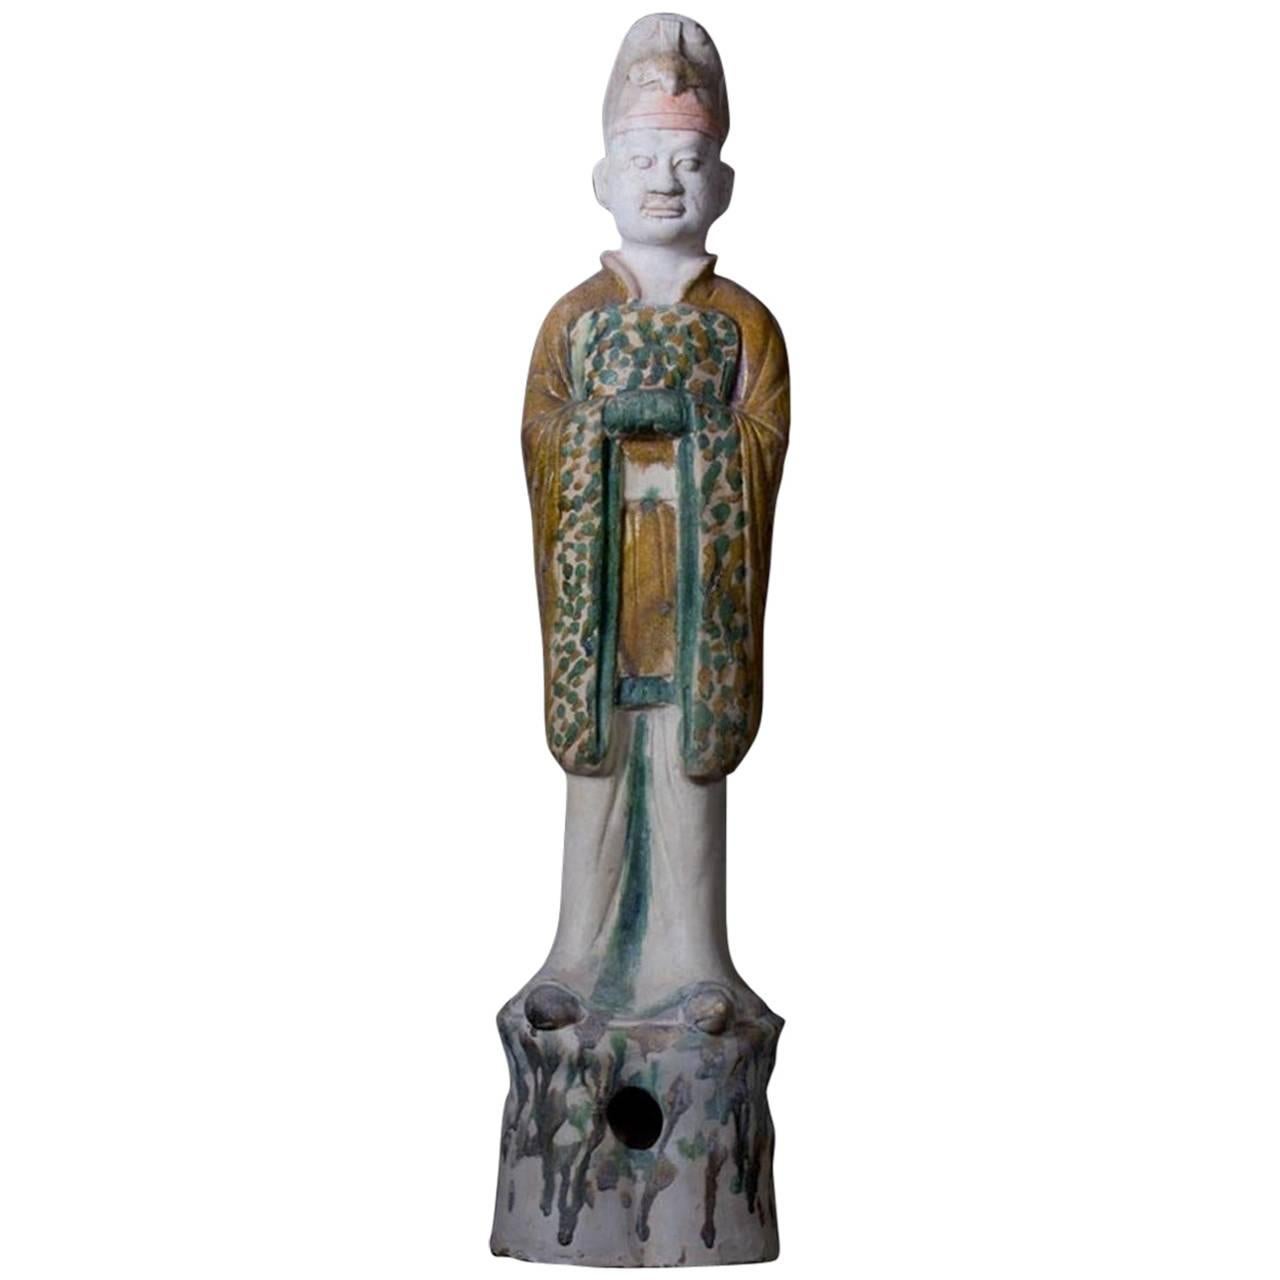 Tang Dynasty Court Official in Sancai Glazed Robes, China '618-907' - TL Tested